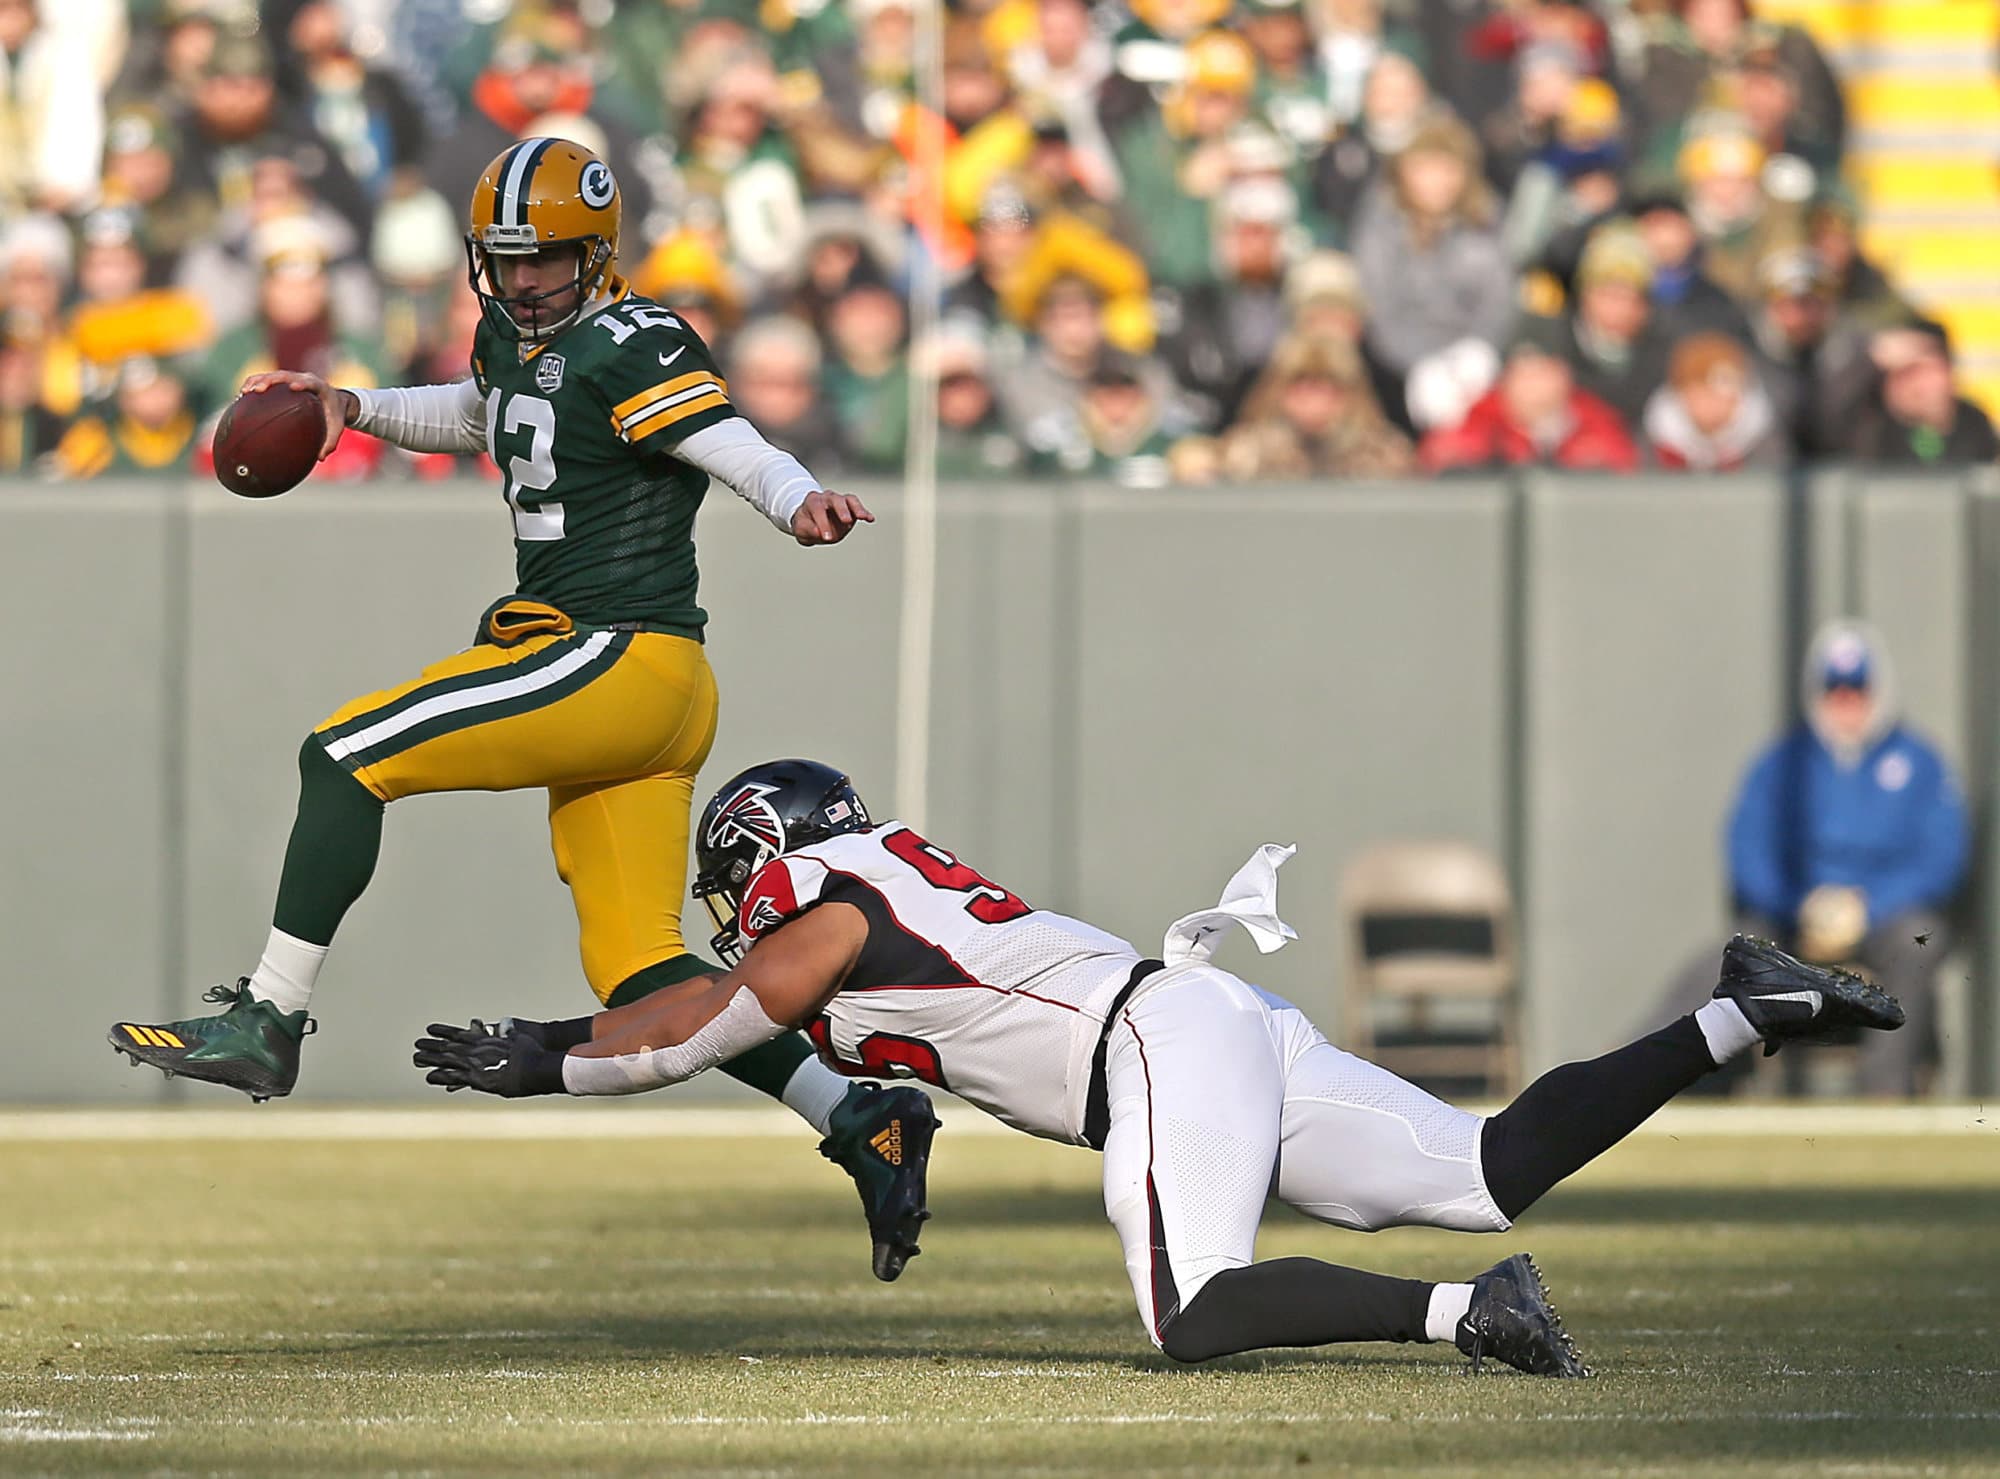 GREEN BAY, WISCONSIN - DECEMBER 09:  Aaron Rodgers #12 of the Green Bay Packers evades a diving Jack Crawford #95 of the Atlanta Falcons during the first half of a game at Lambeau Field on December 09, 2018 in Green Bay, Wisconsin. (Photo by Dylan Buell/Getty Images)